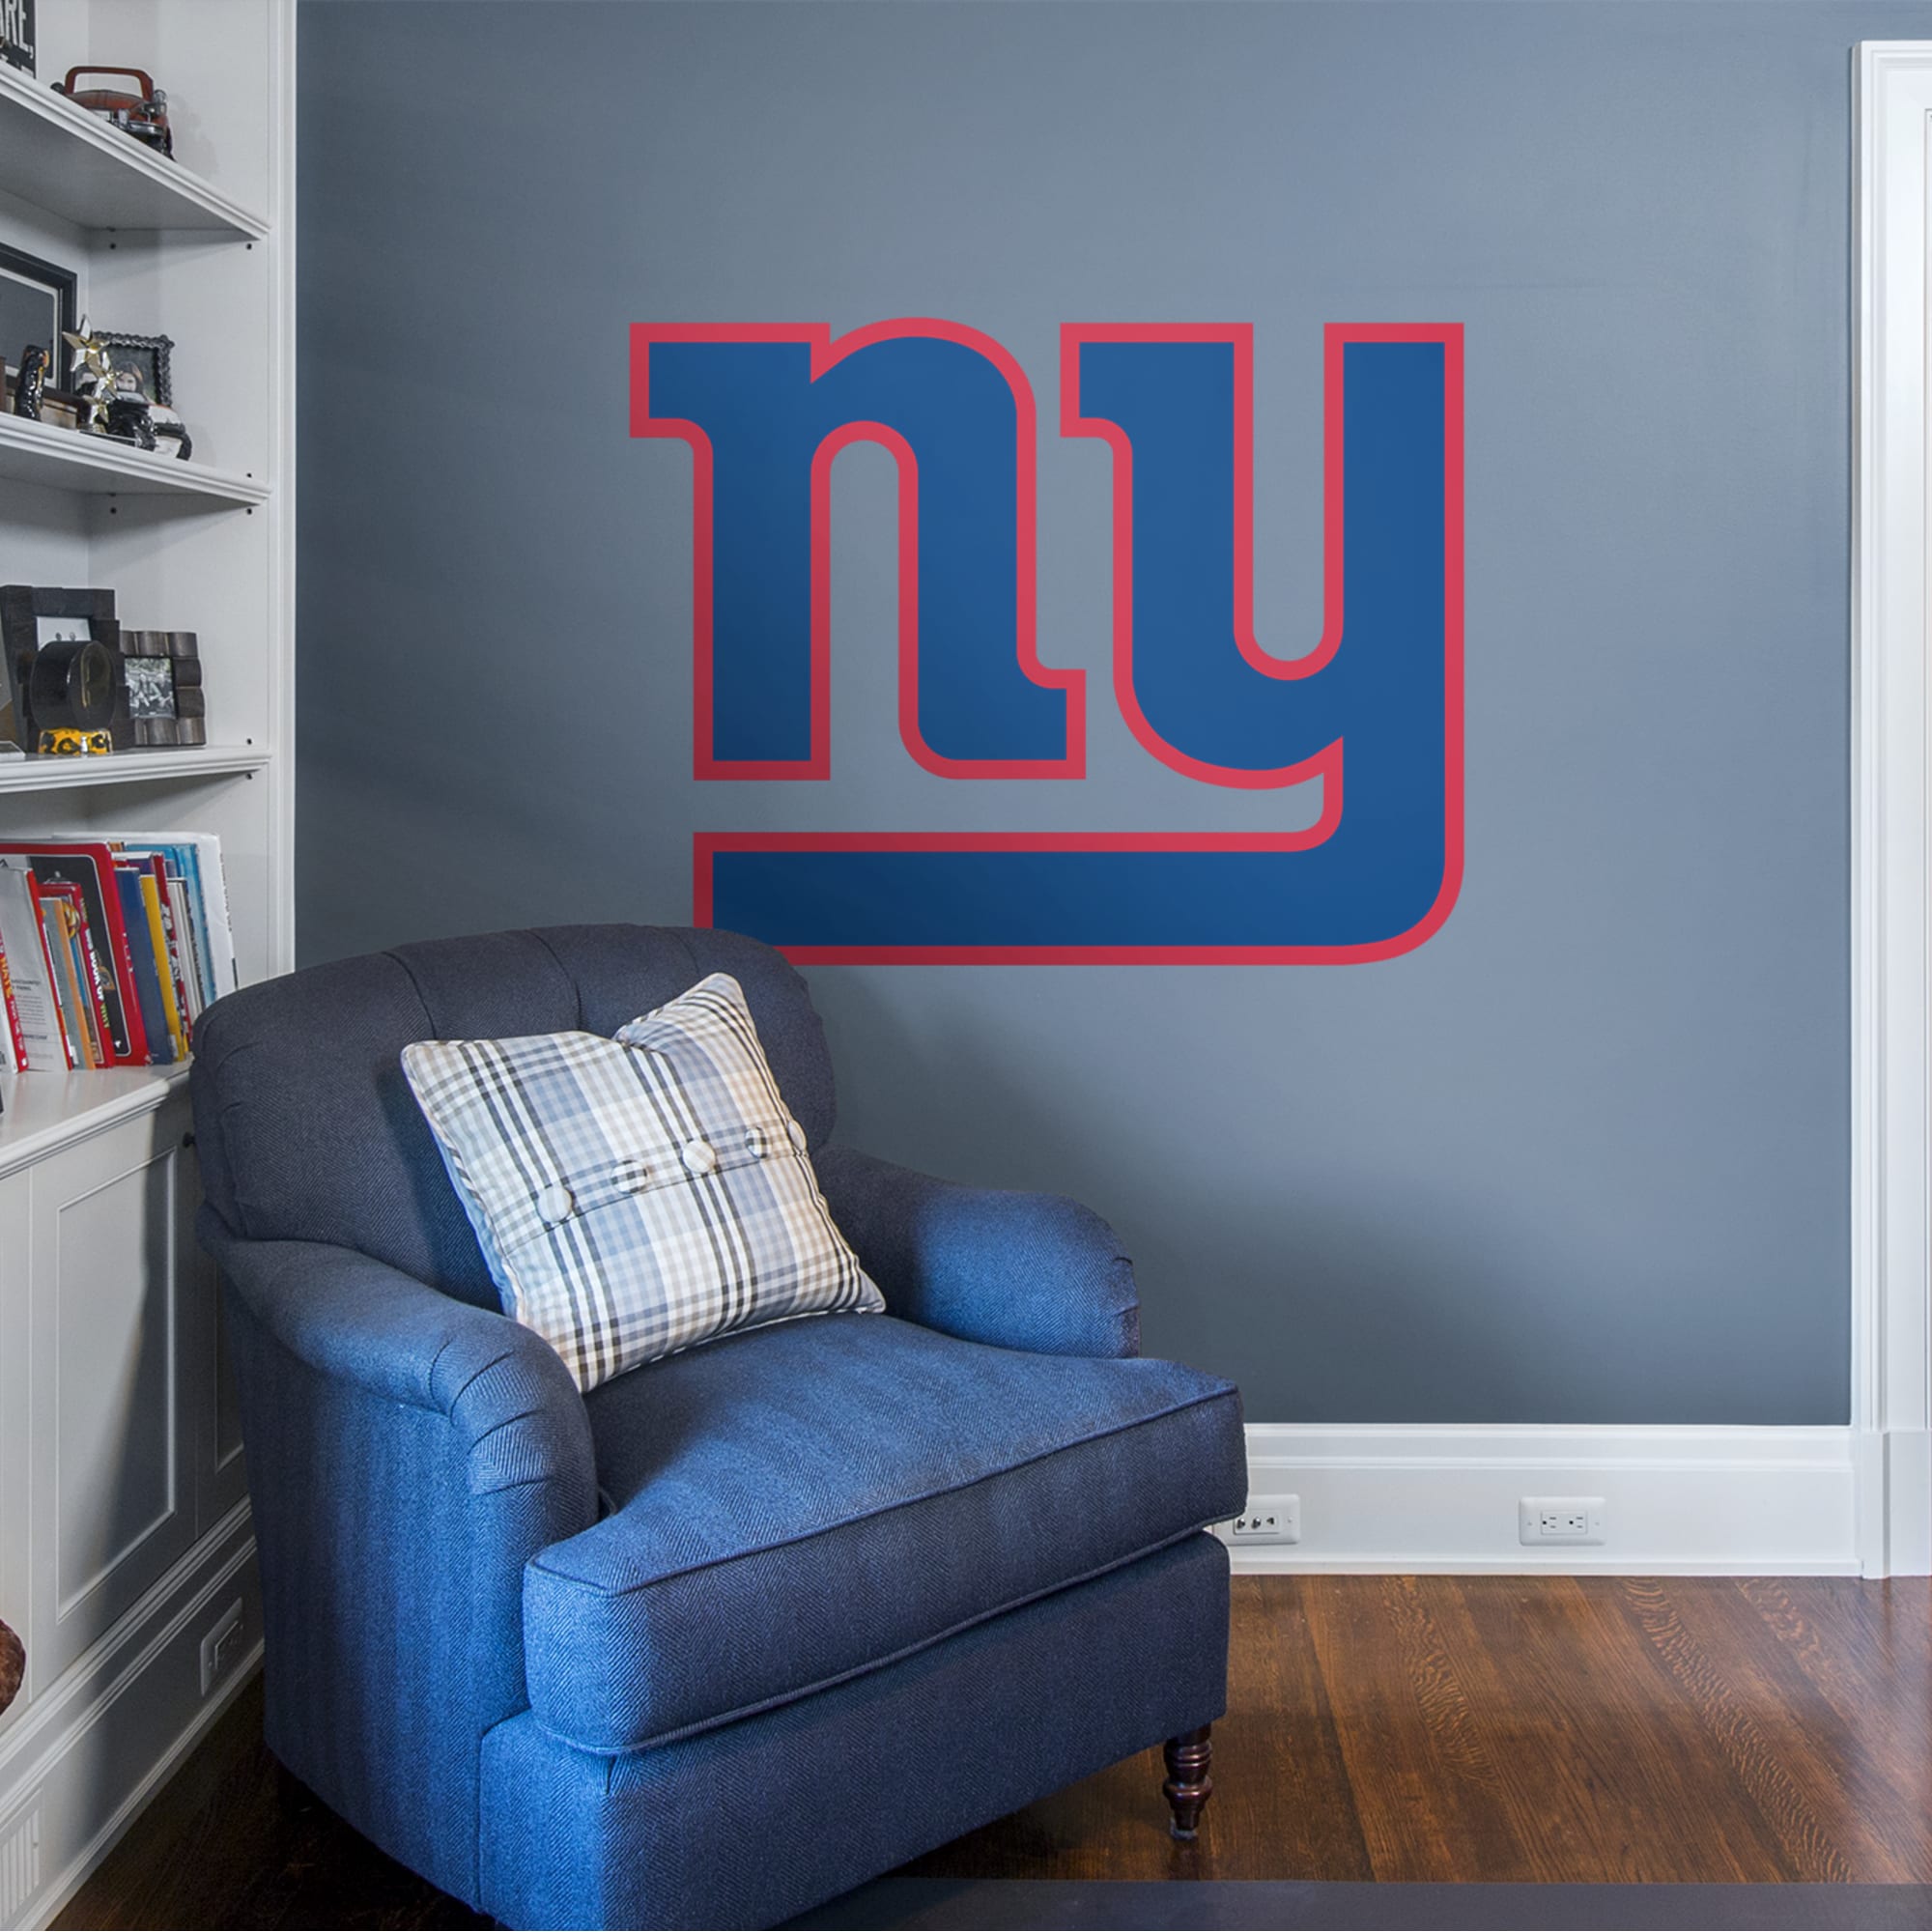 New York Giants: Logo - Officially Licensed NFL Transfer Decal by Fathead | Vinyl